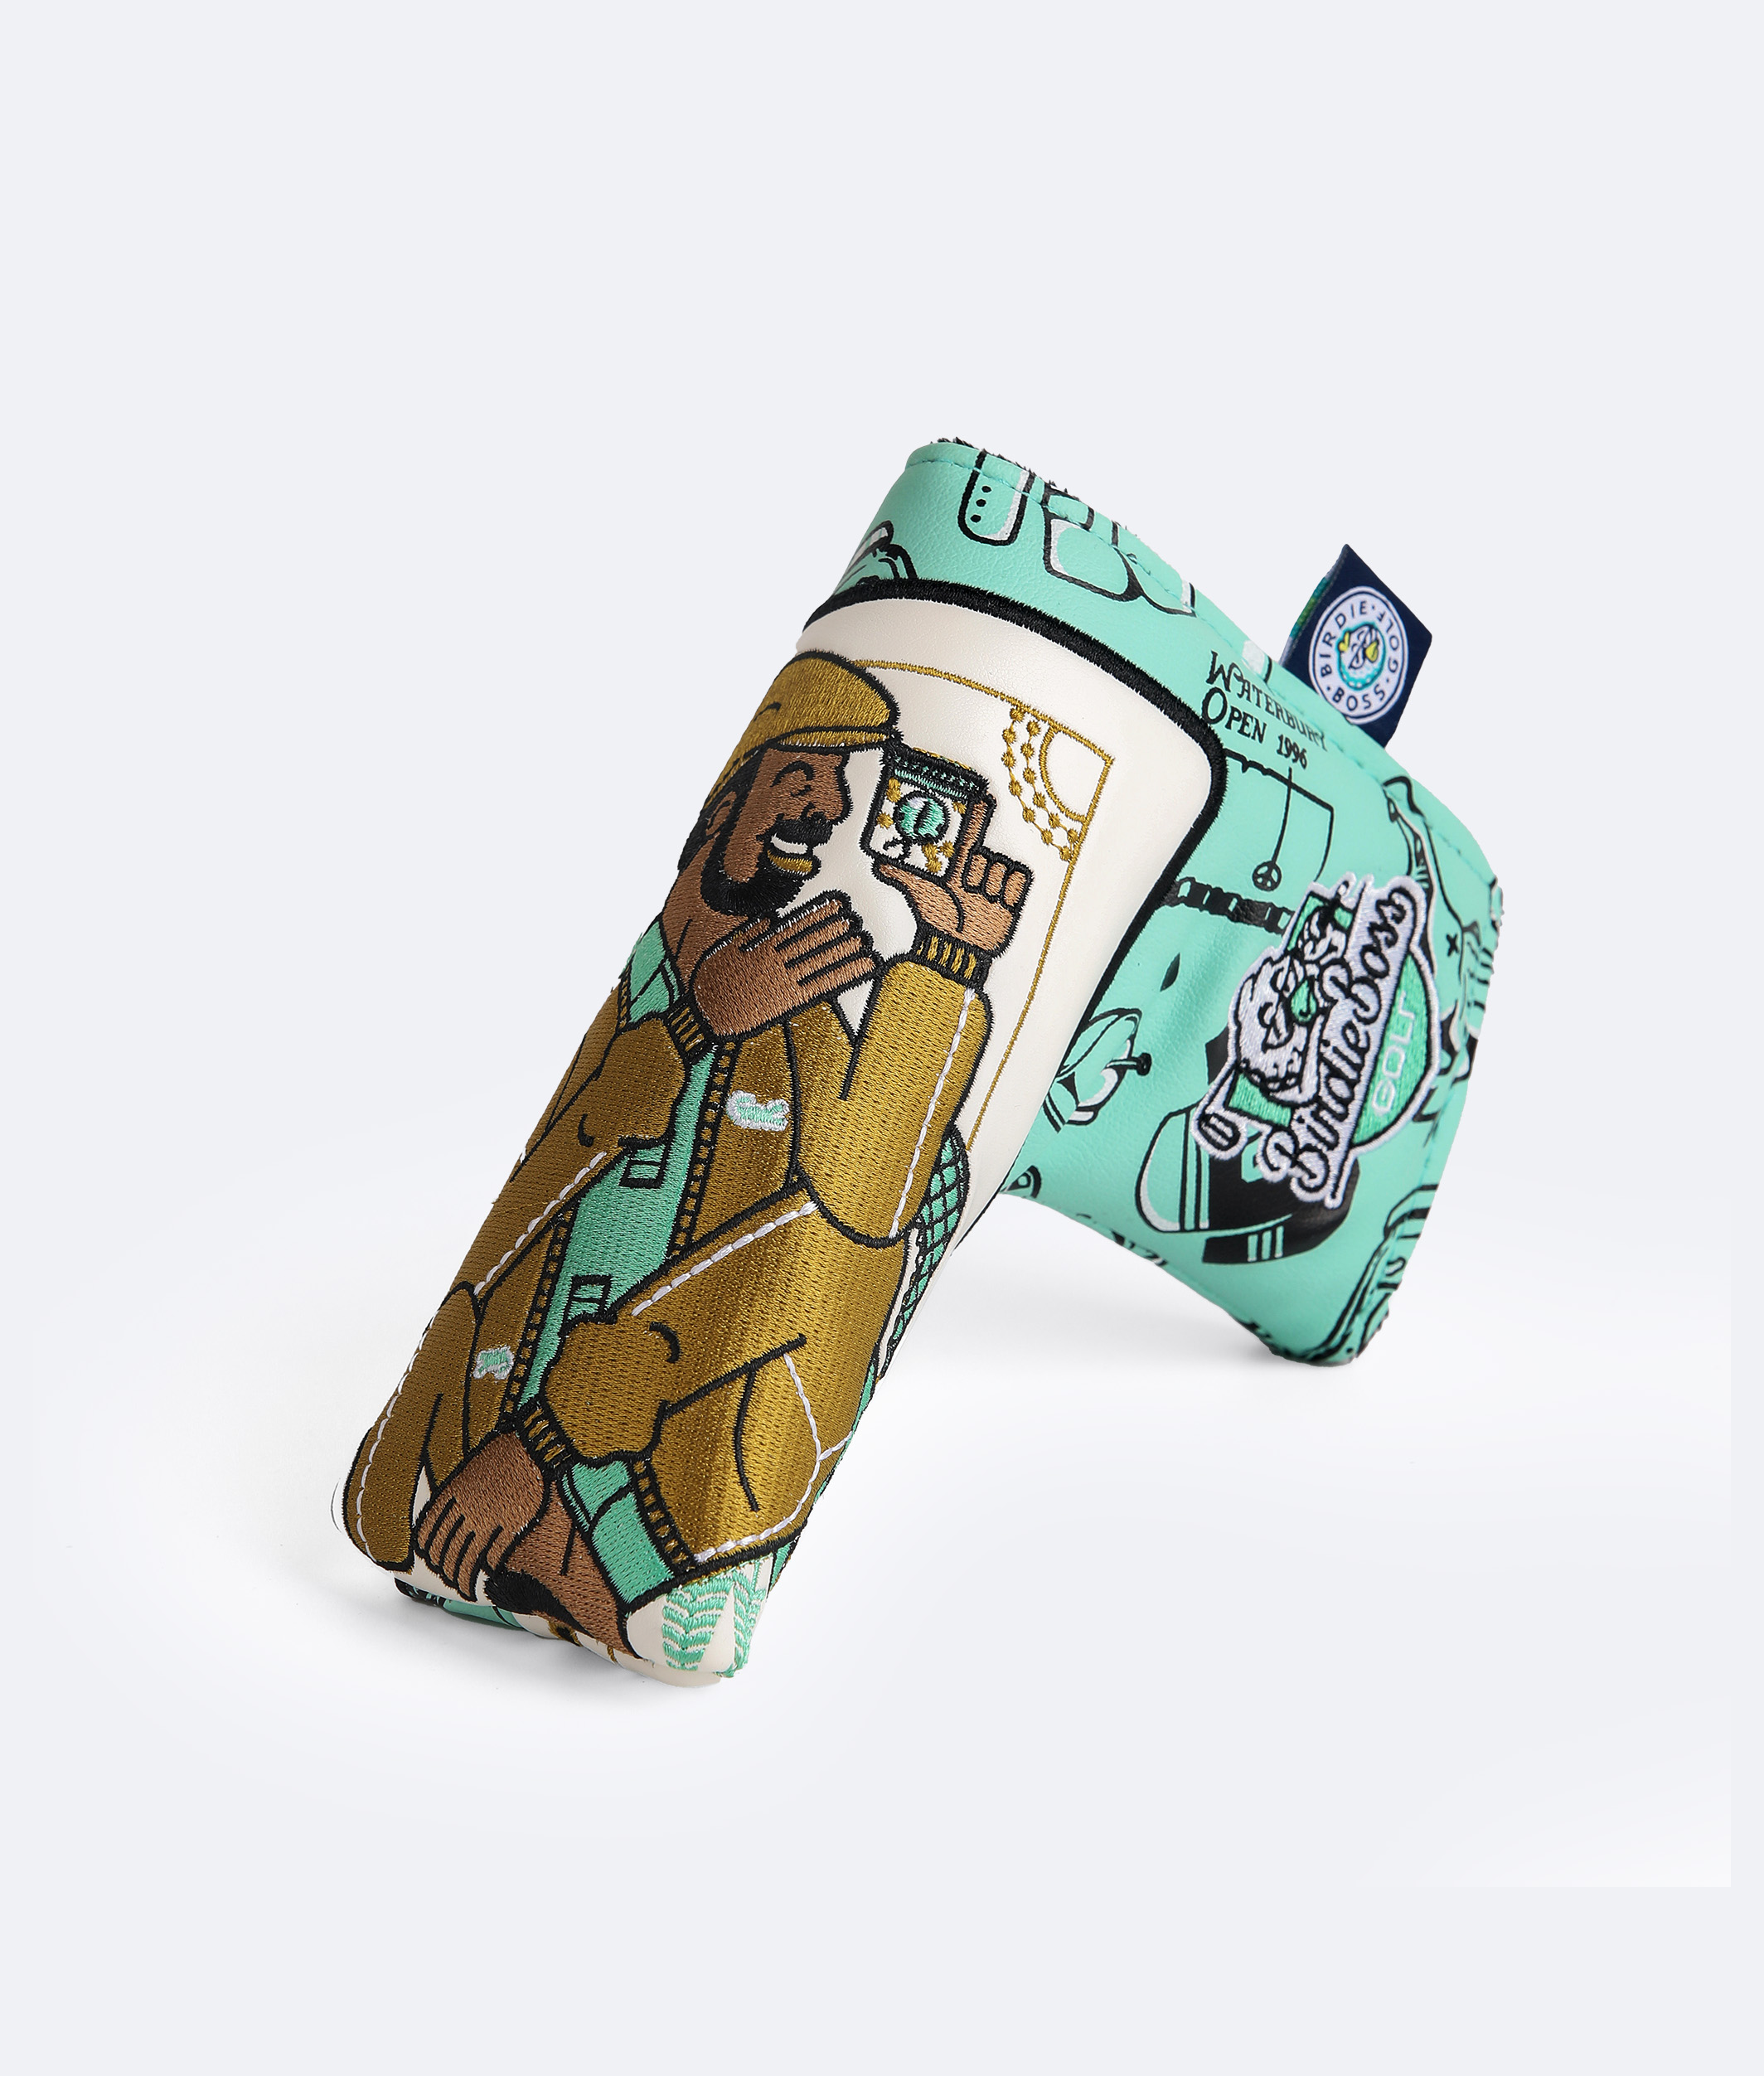 Royal Chubbs Putter Headcover